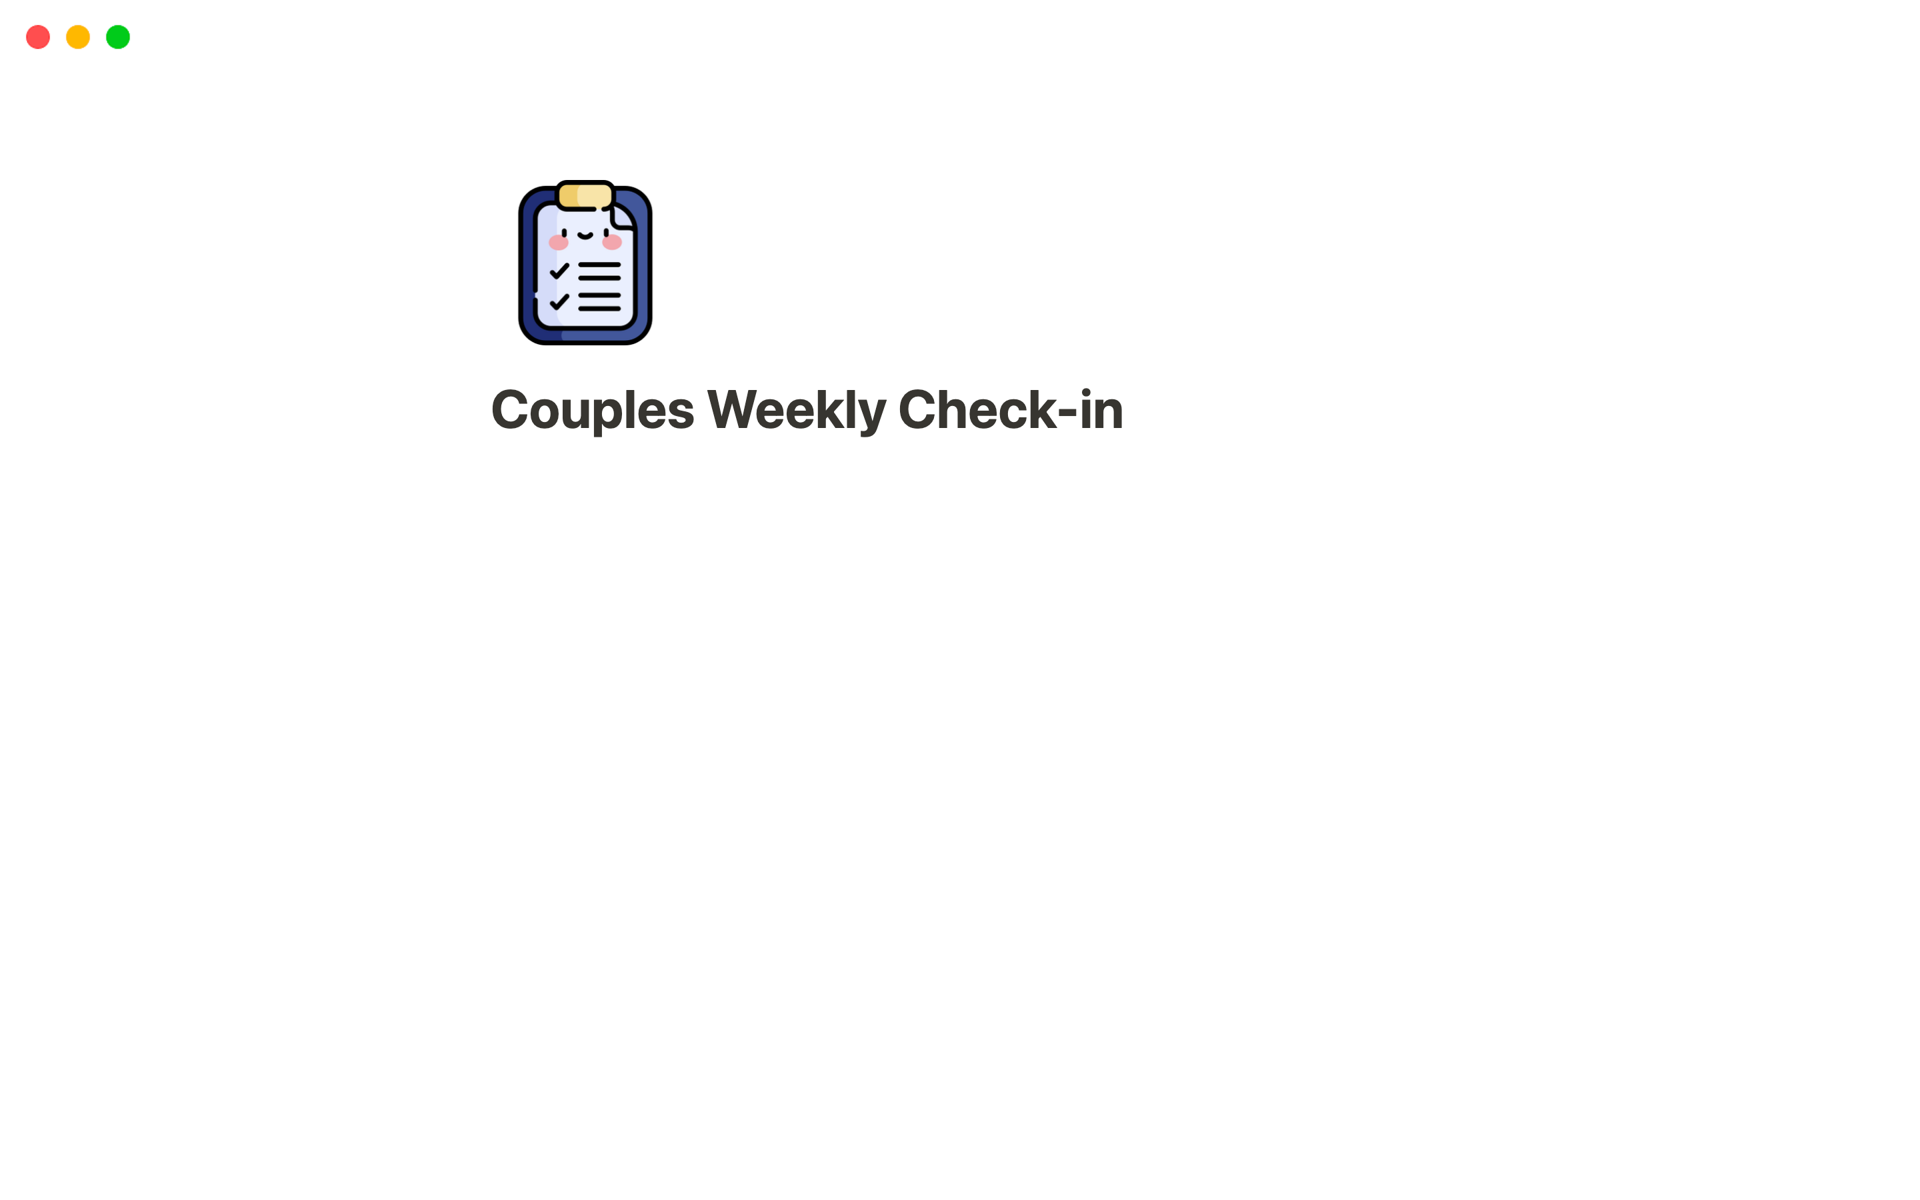 Couples Weekly Check-inのテンプレートのプレビュー